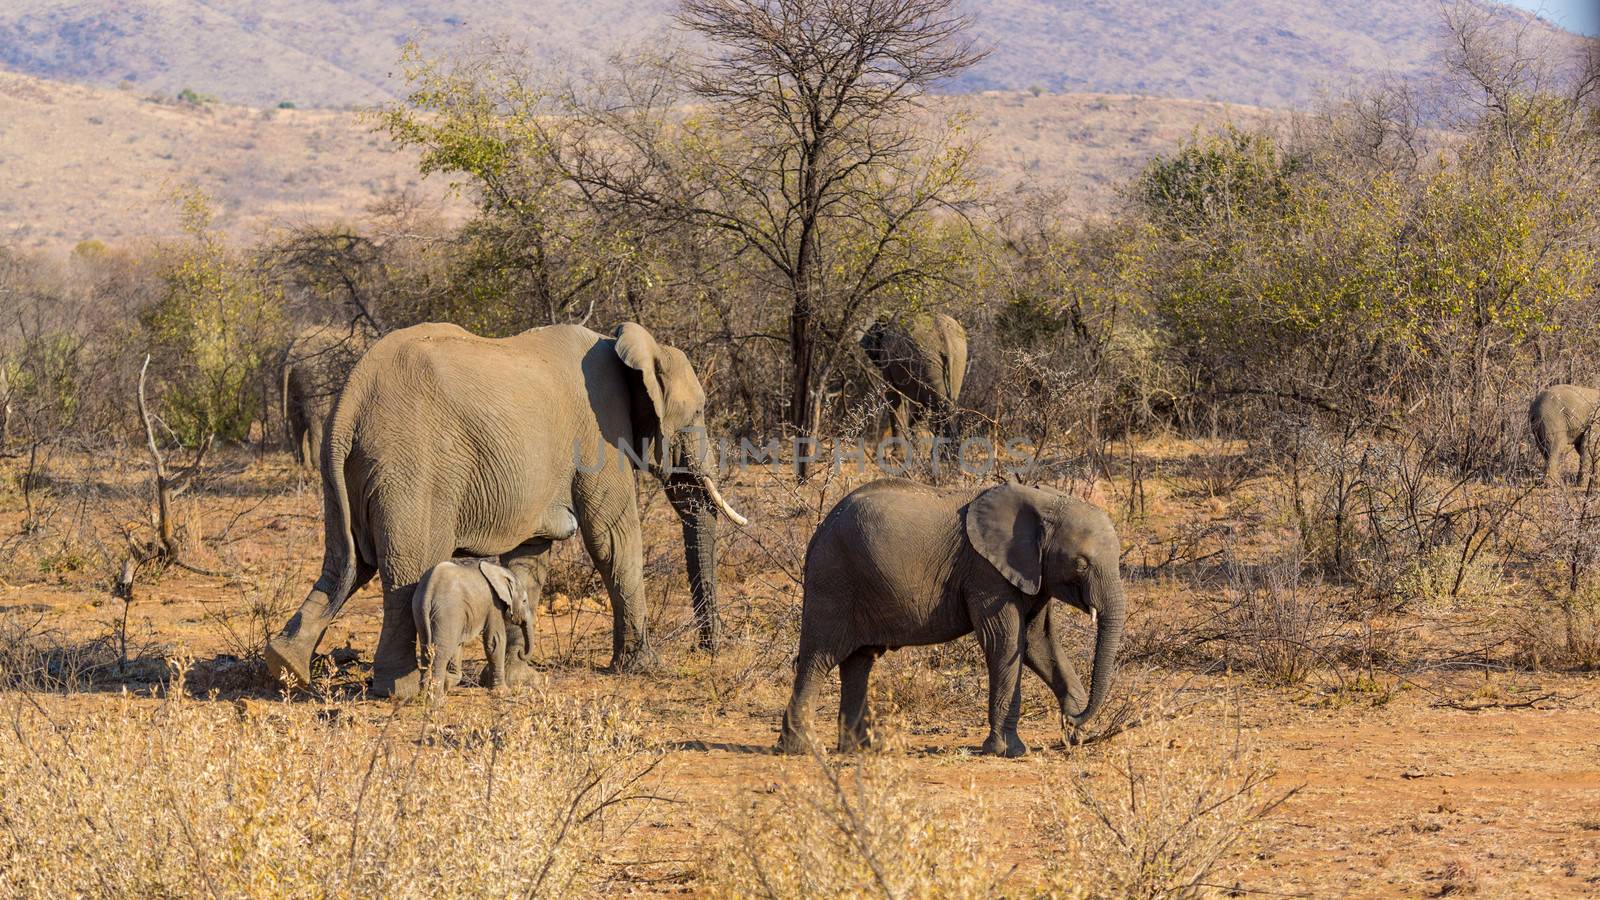 A small elephant herd wandering in the grasslands of South Africa's Pilanesberg National Park